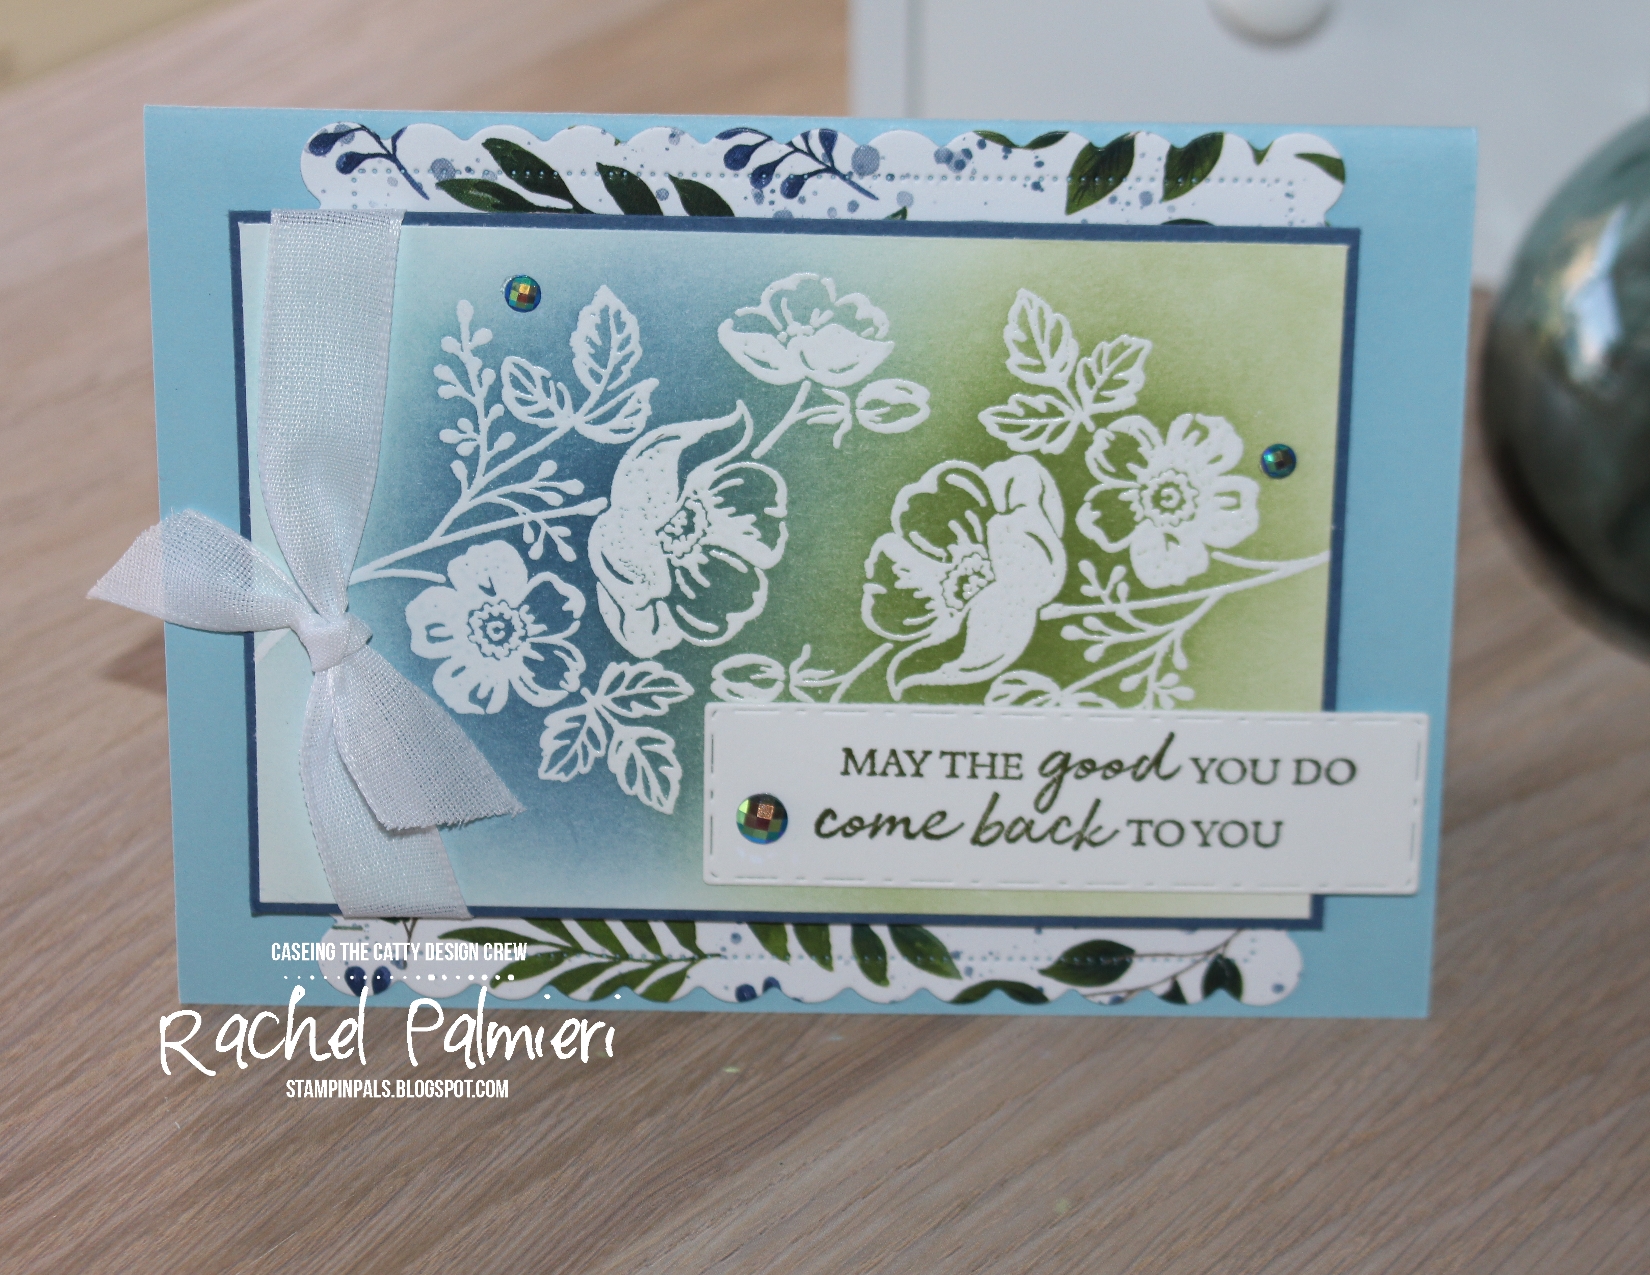 Stampin' Pals: CTC#326 CASE A Layout and Step It Up.